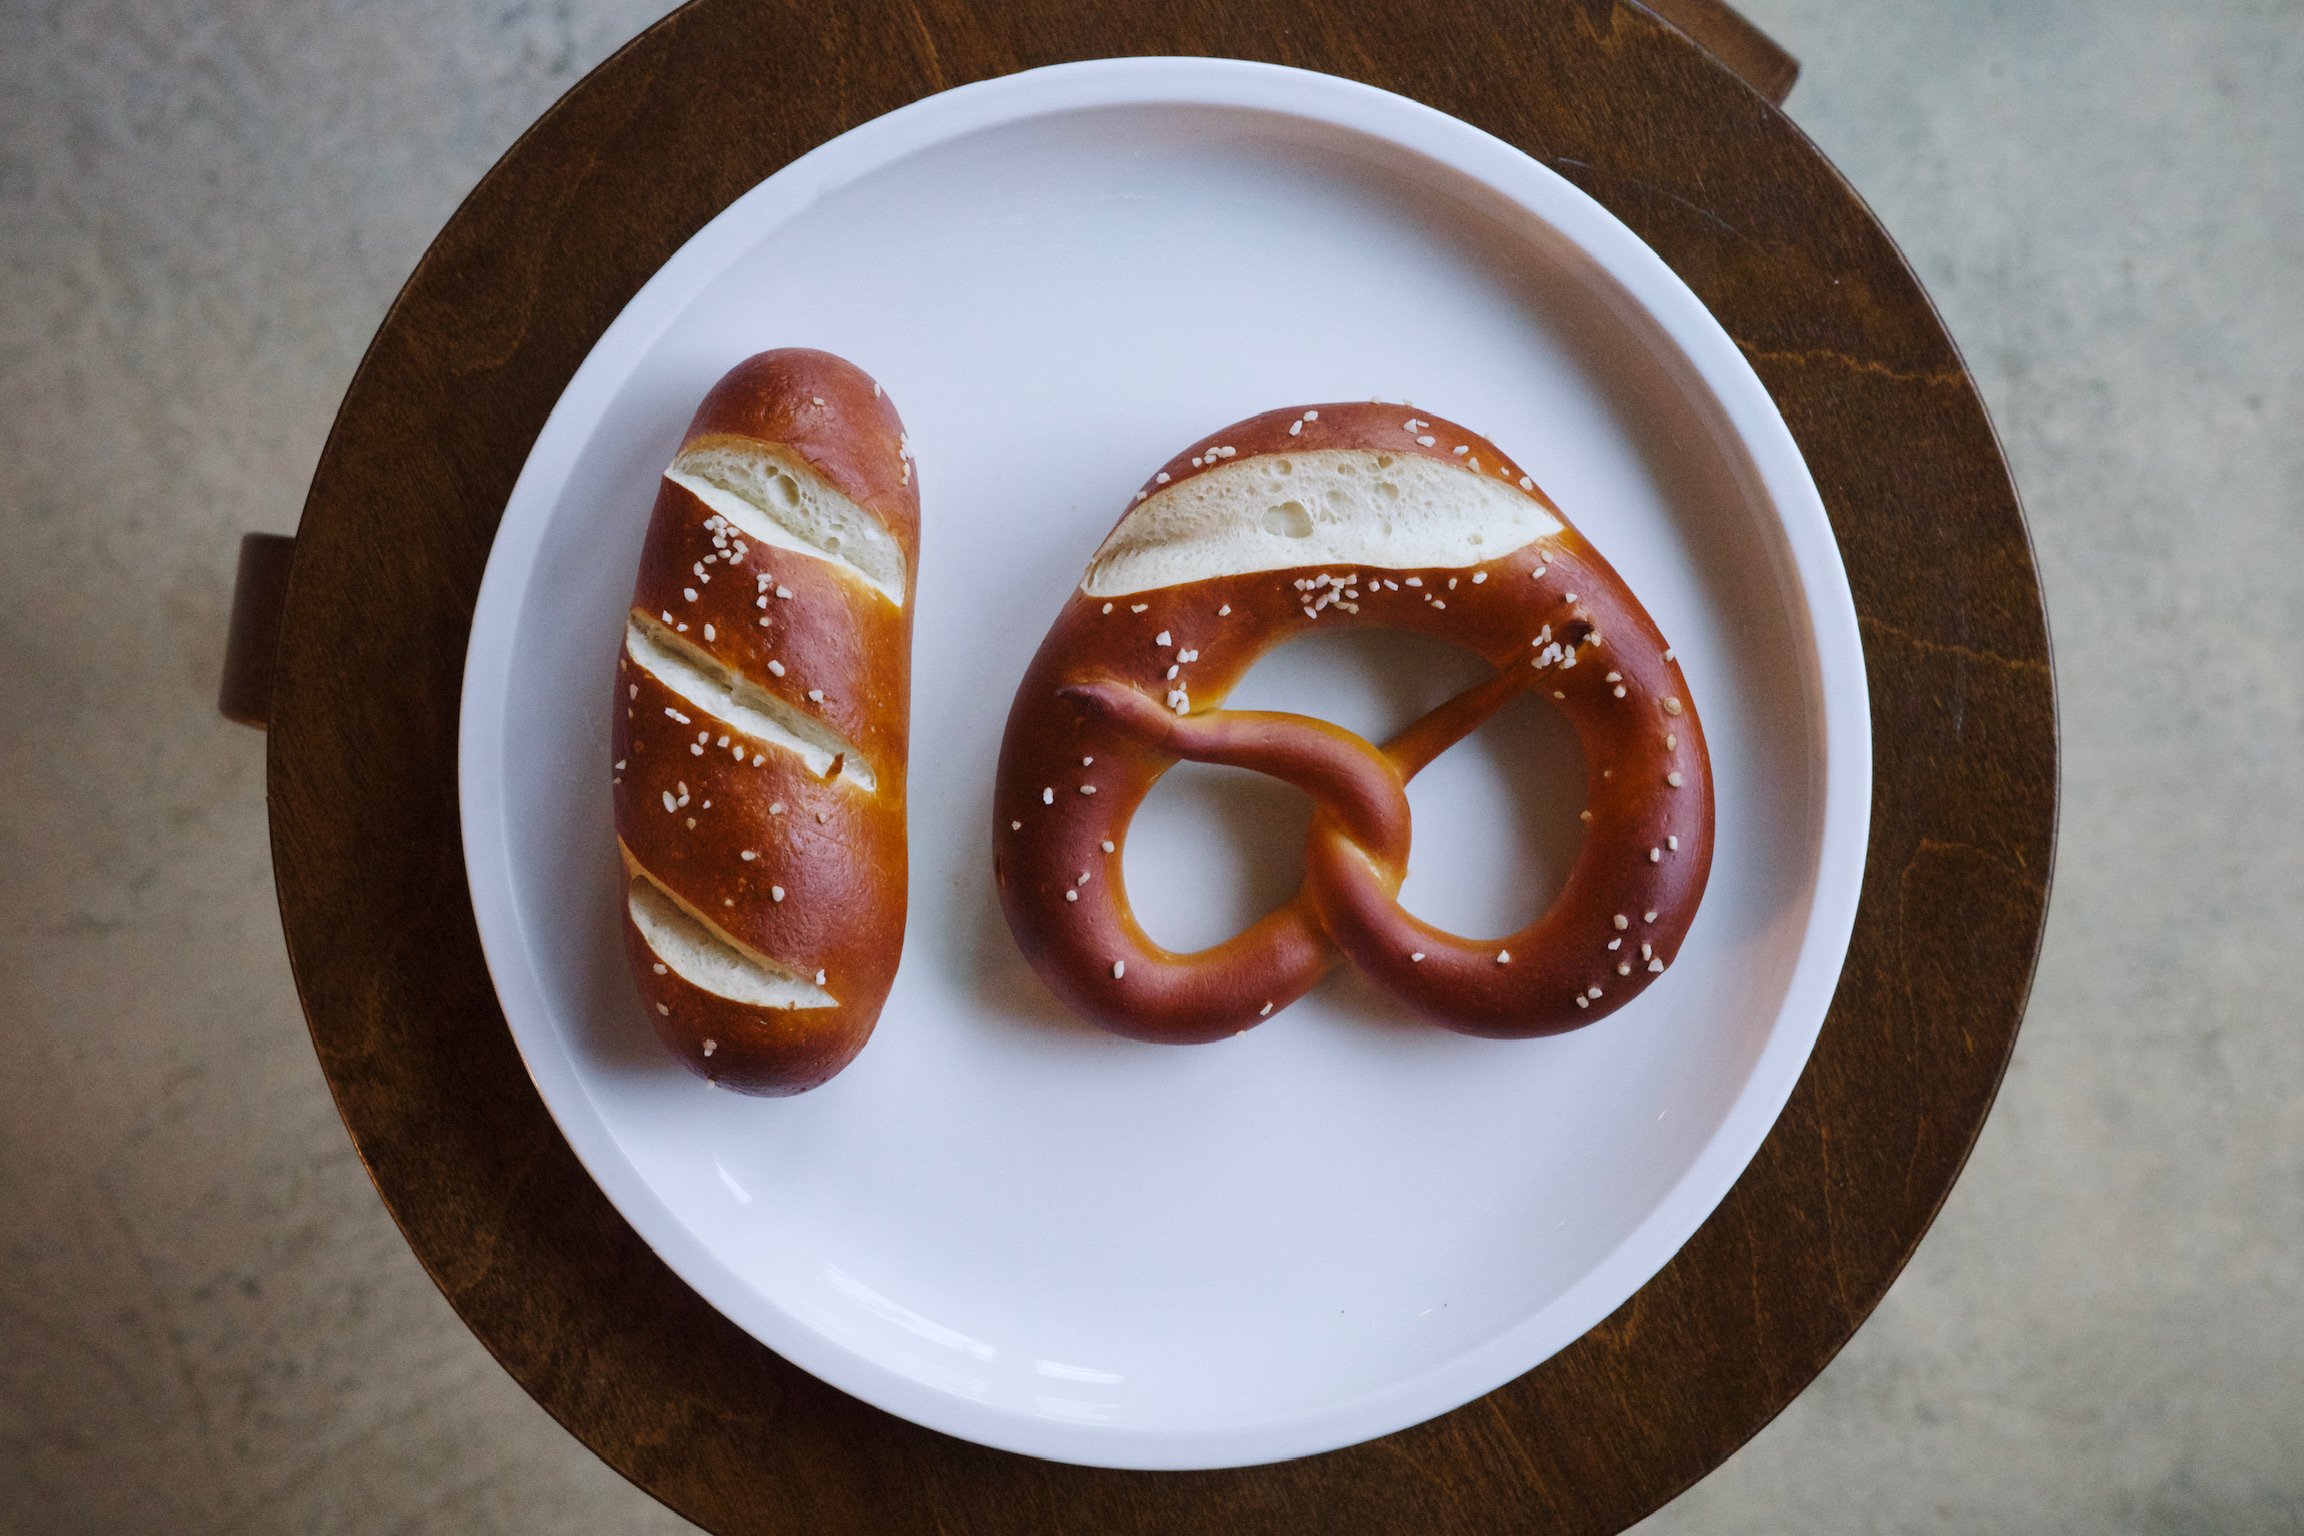 One pretzel and one pretzel stick side by side on a white plate on a stool.